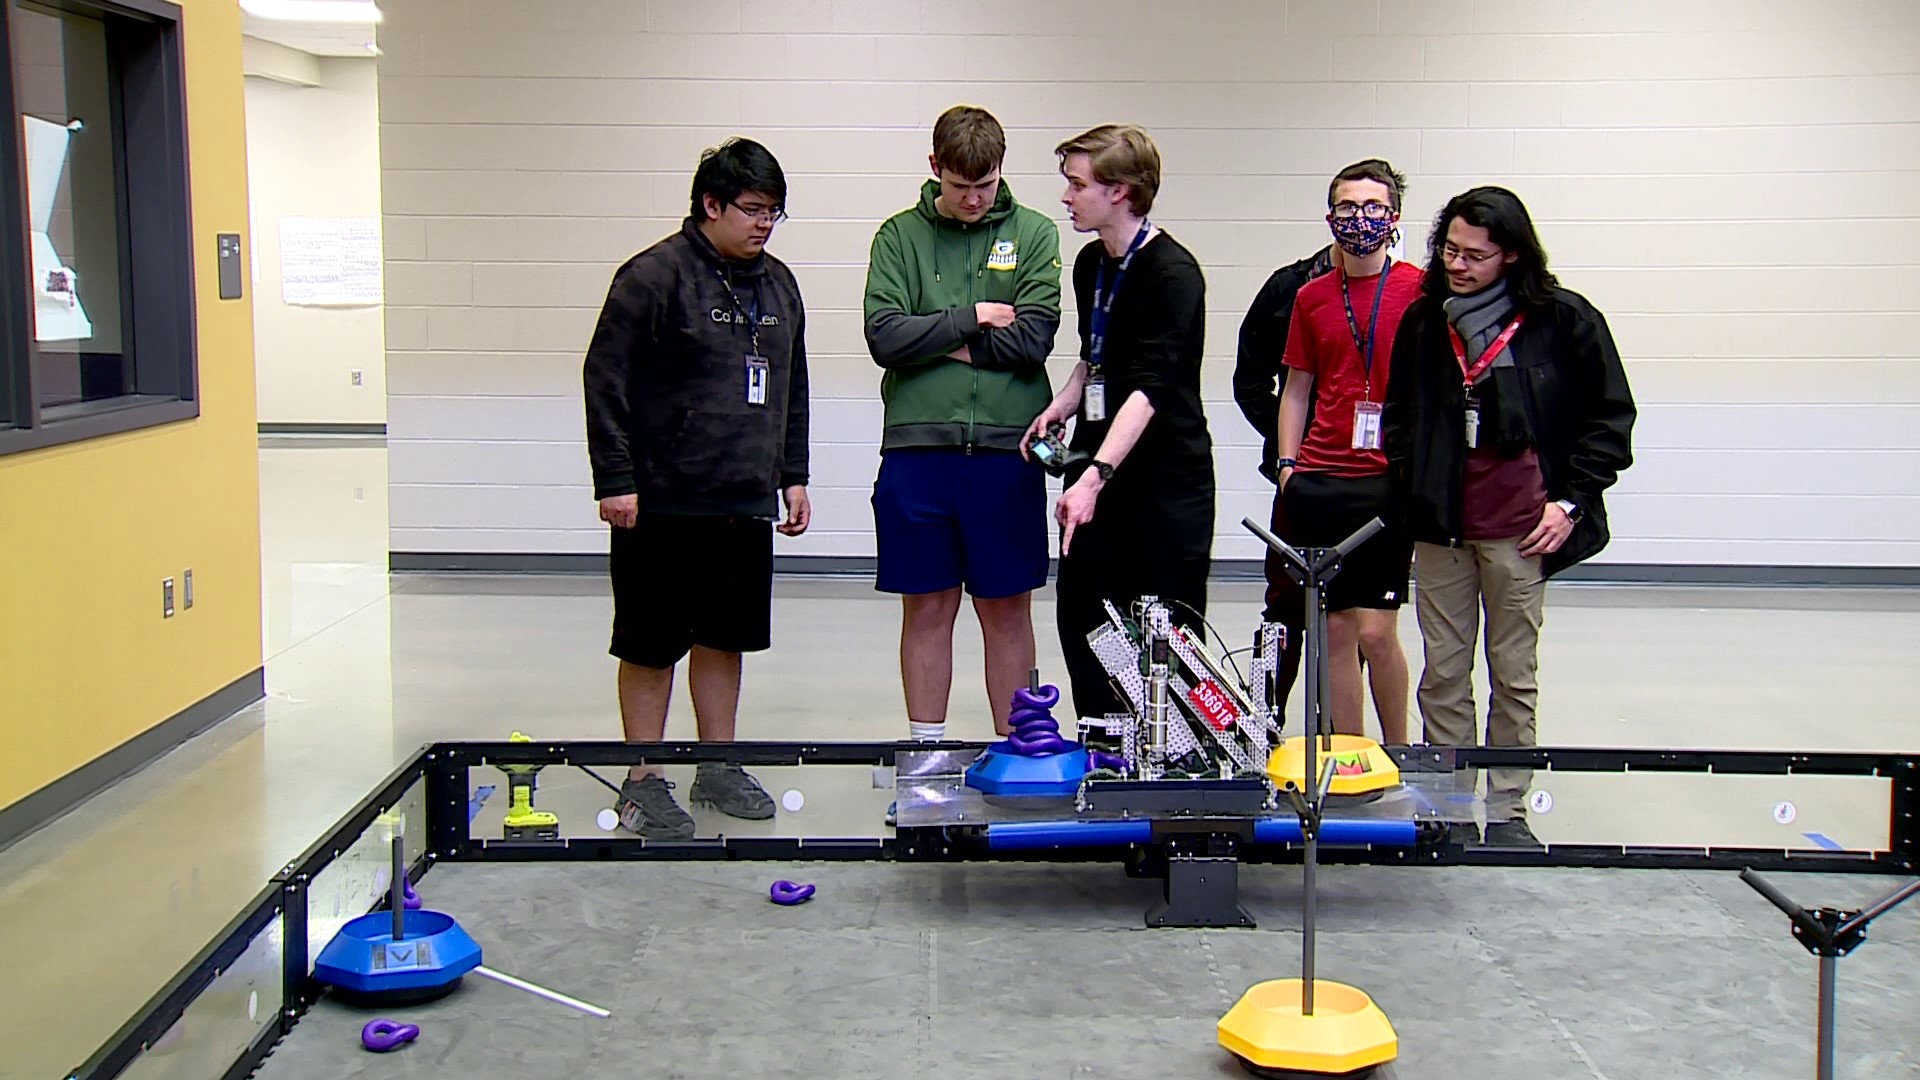 Bentonville West students are ready to show off their robotic skills on the world stage.